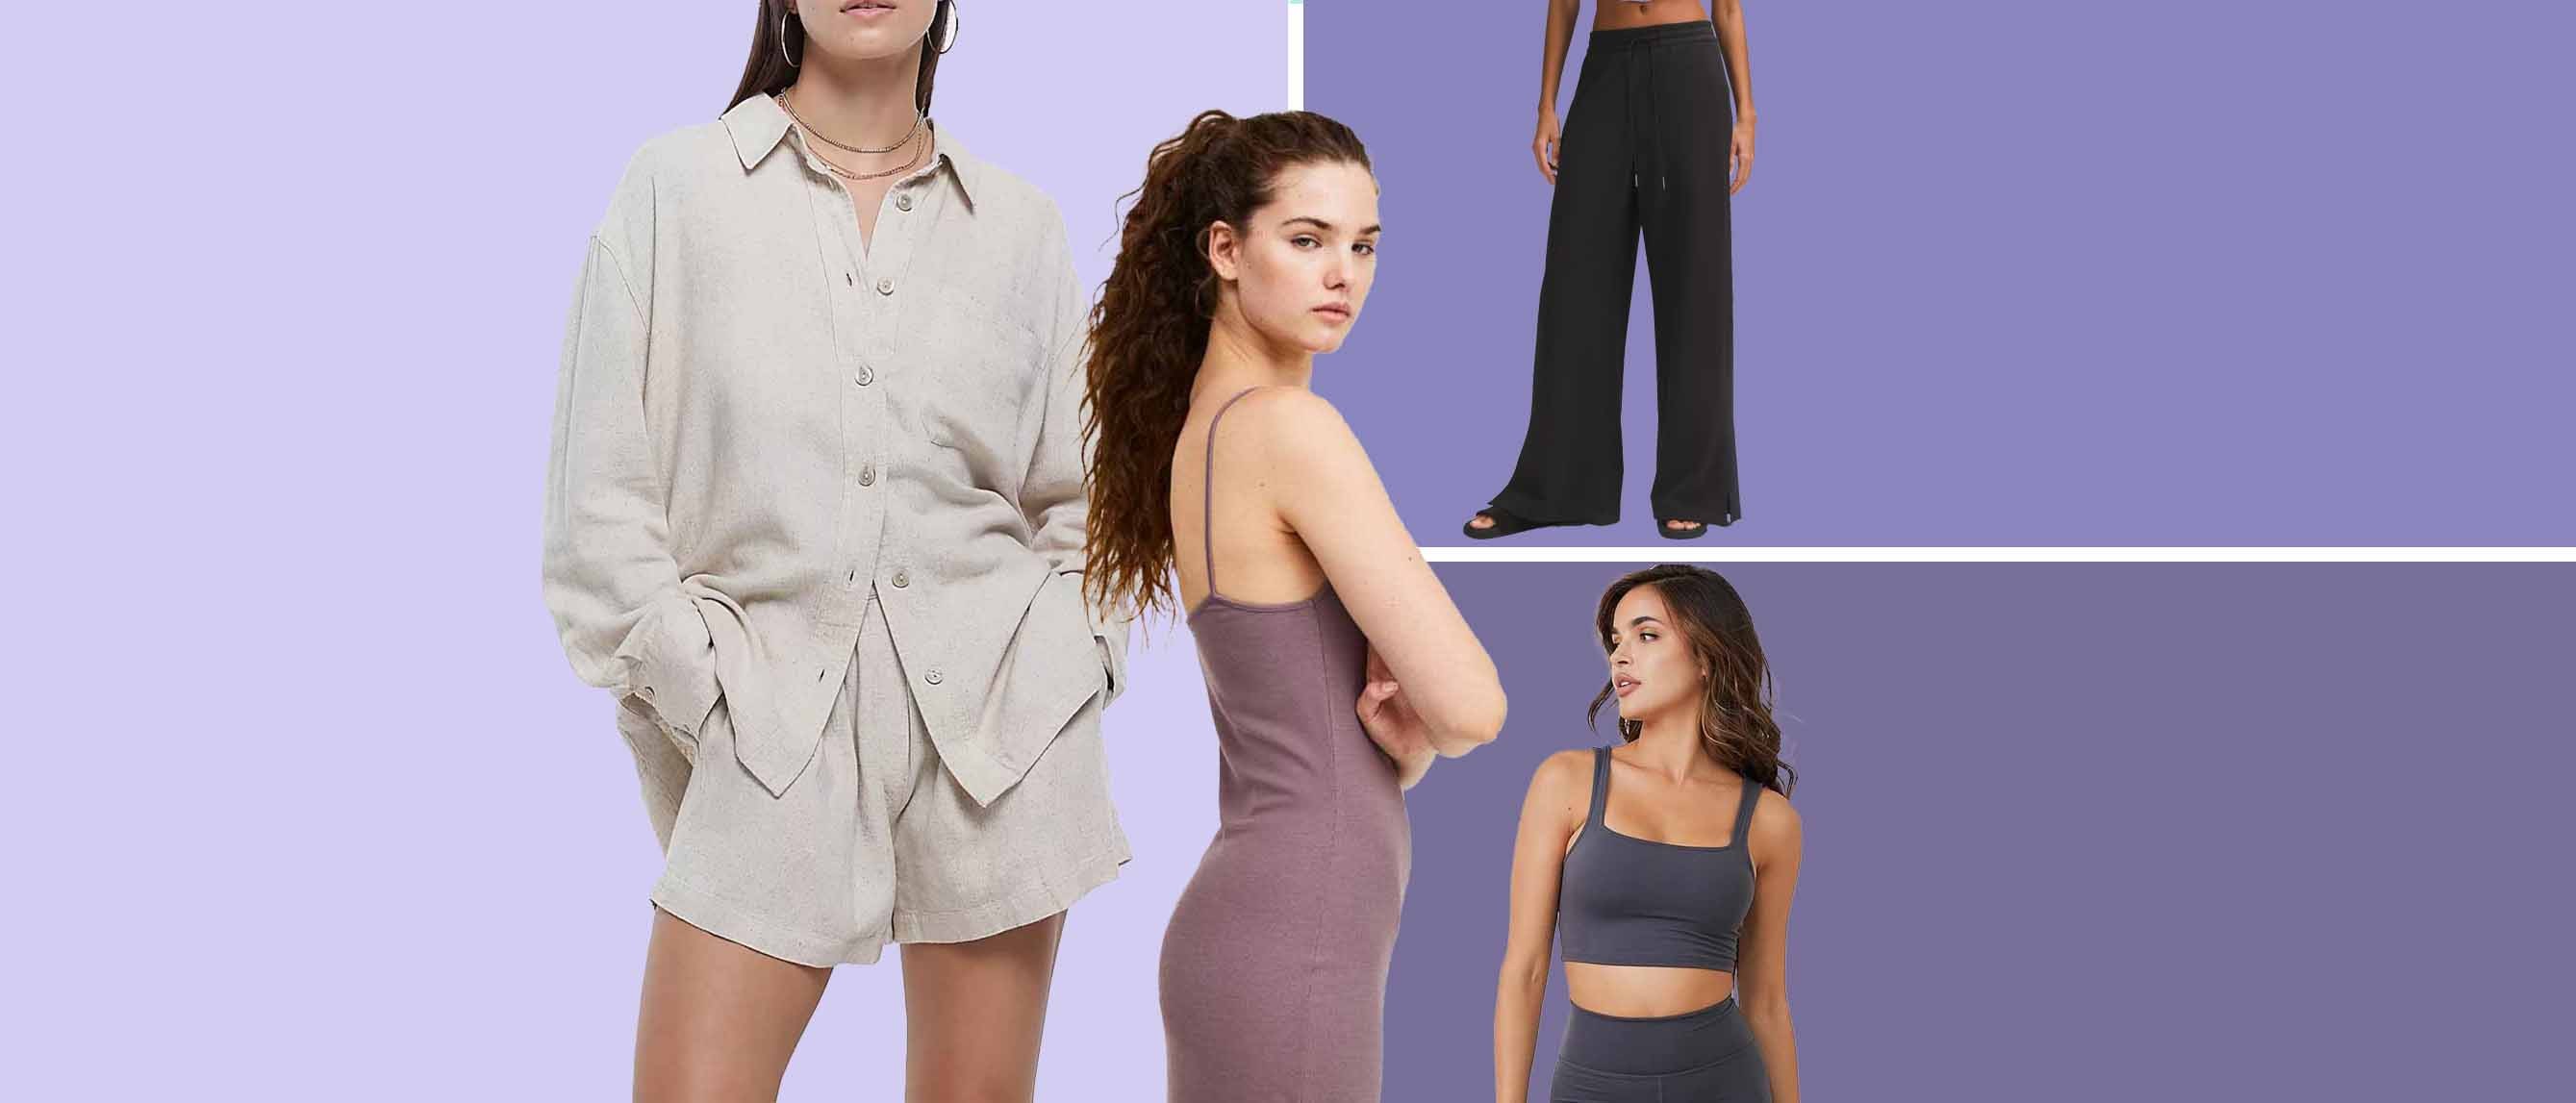 Stay cute and comfy with our top picks for loungewear